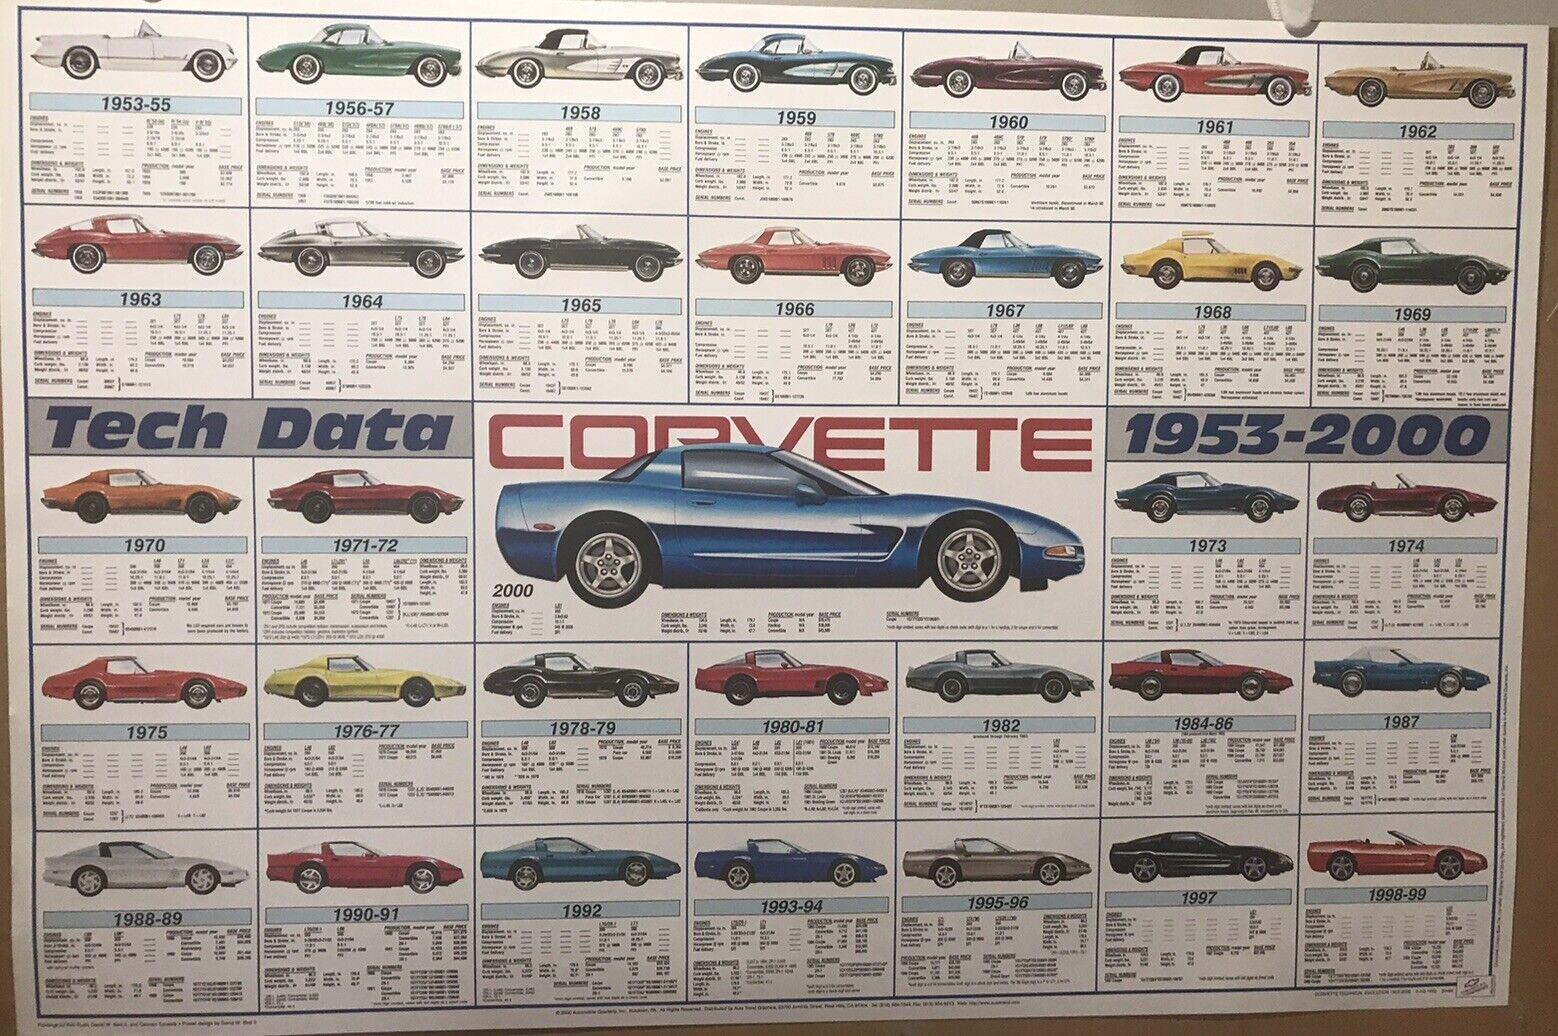 Corvette Tech Data 1953-2000 History Specifications Extremely Rare Car Poster